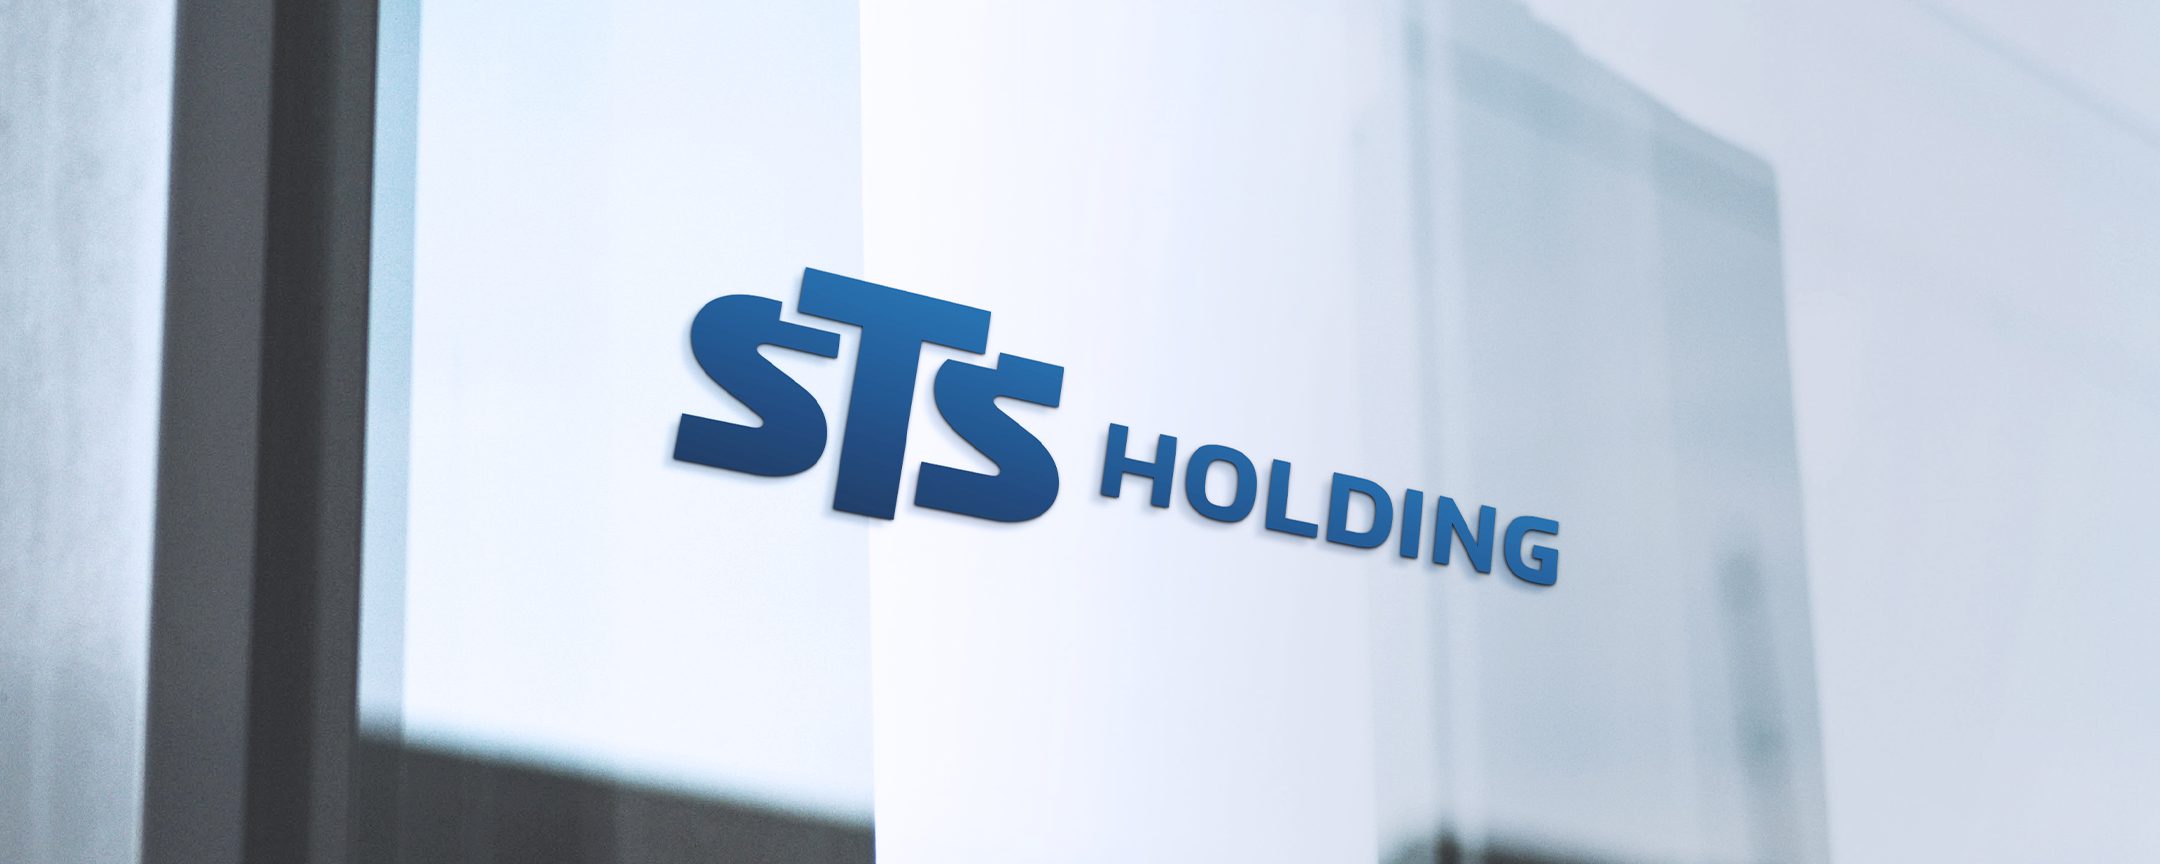 News - STS Holding S.A. announces the intention to float on the Warsaw Stock Exchange